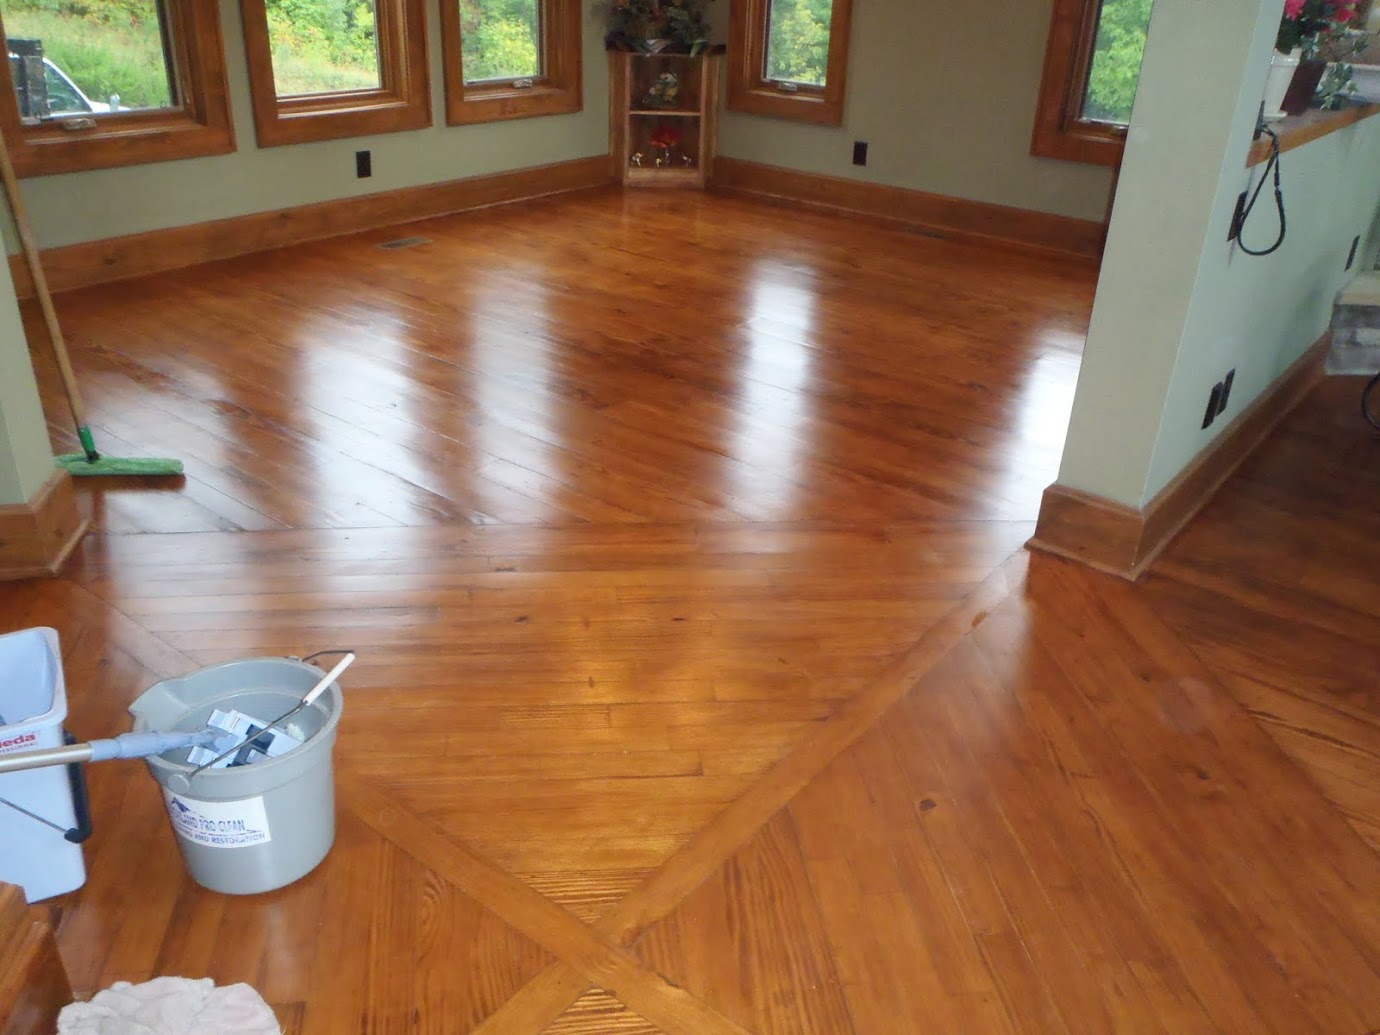 Wood Floor Cleaning Service And Cost In, Hardwood Floor Cleaning Service Cost